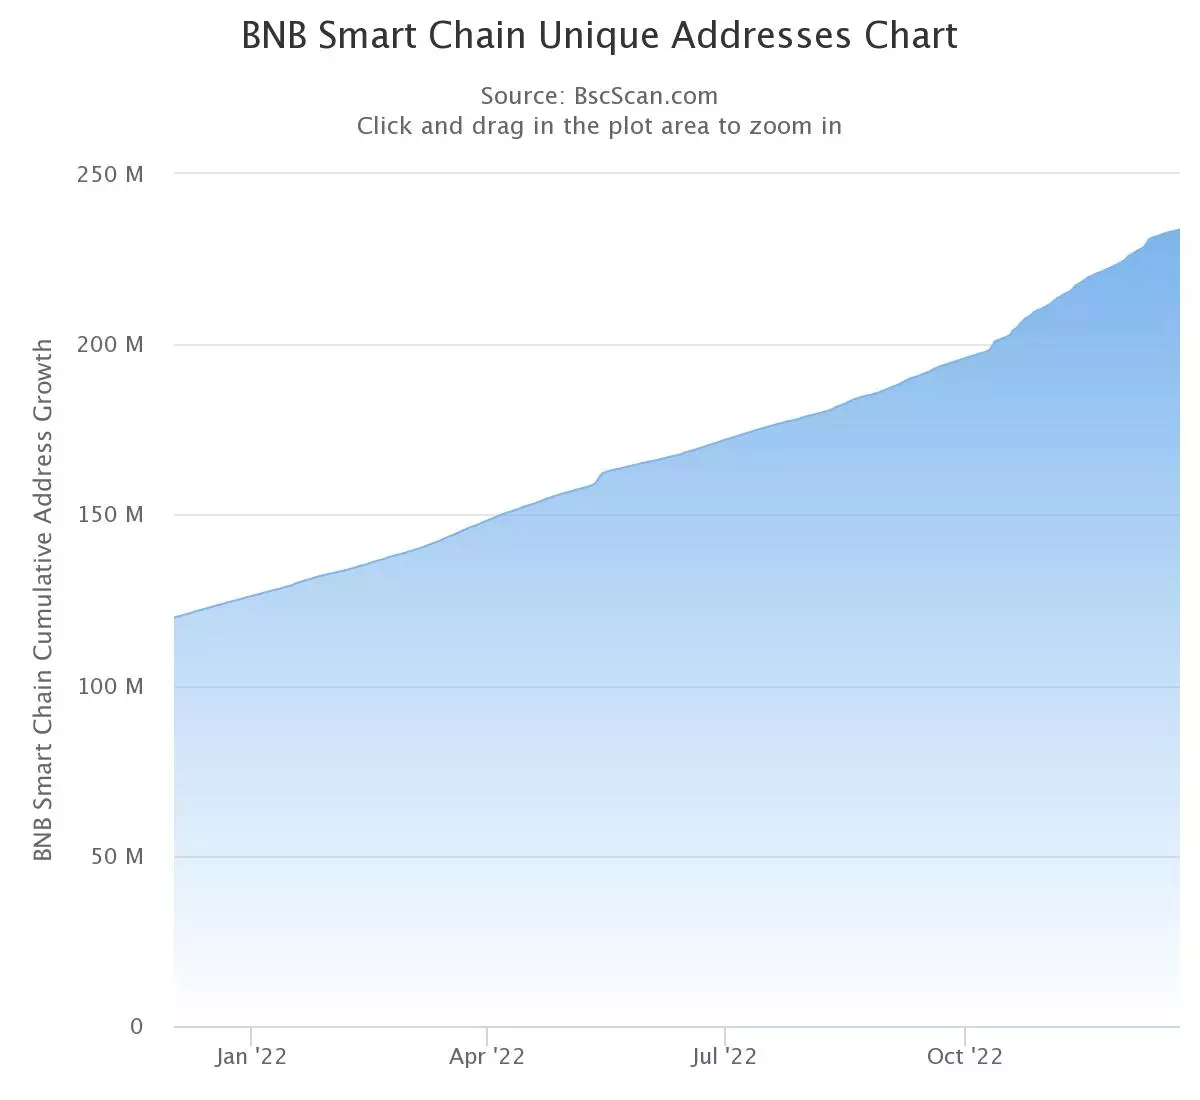 Evolution of the number of unique addresses on the BNB Chain